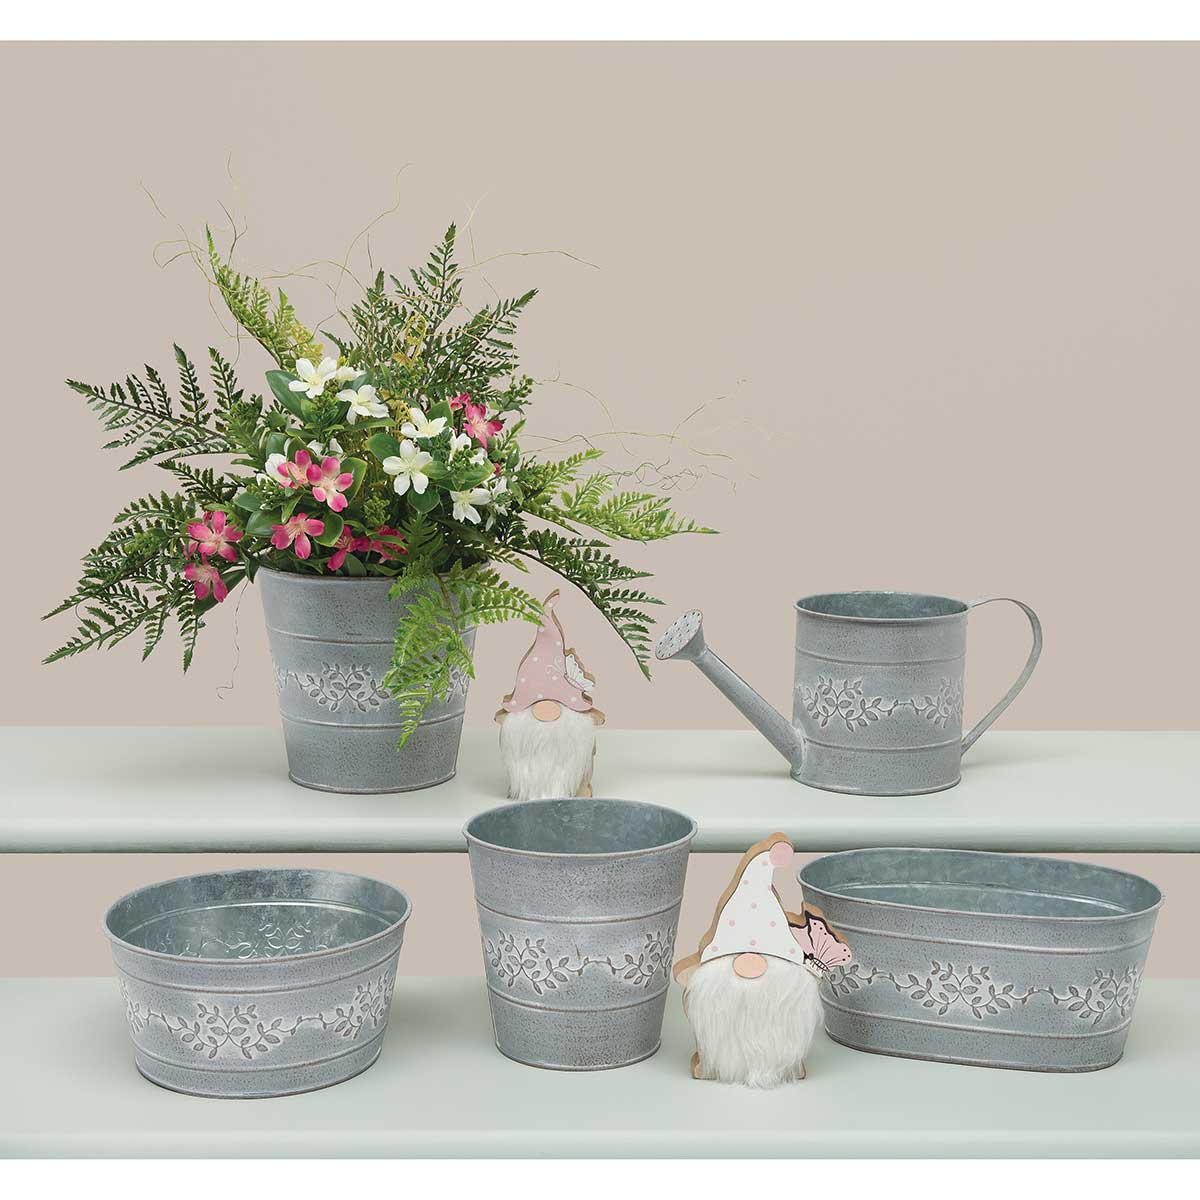 BUCKET PRIVET GREY BOWL 7.75IN X 3.75IN METAL - Click Image to Close